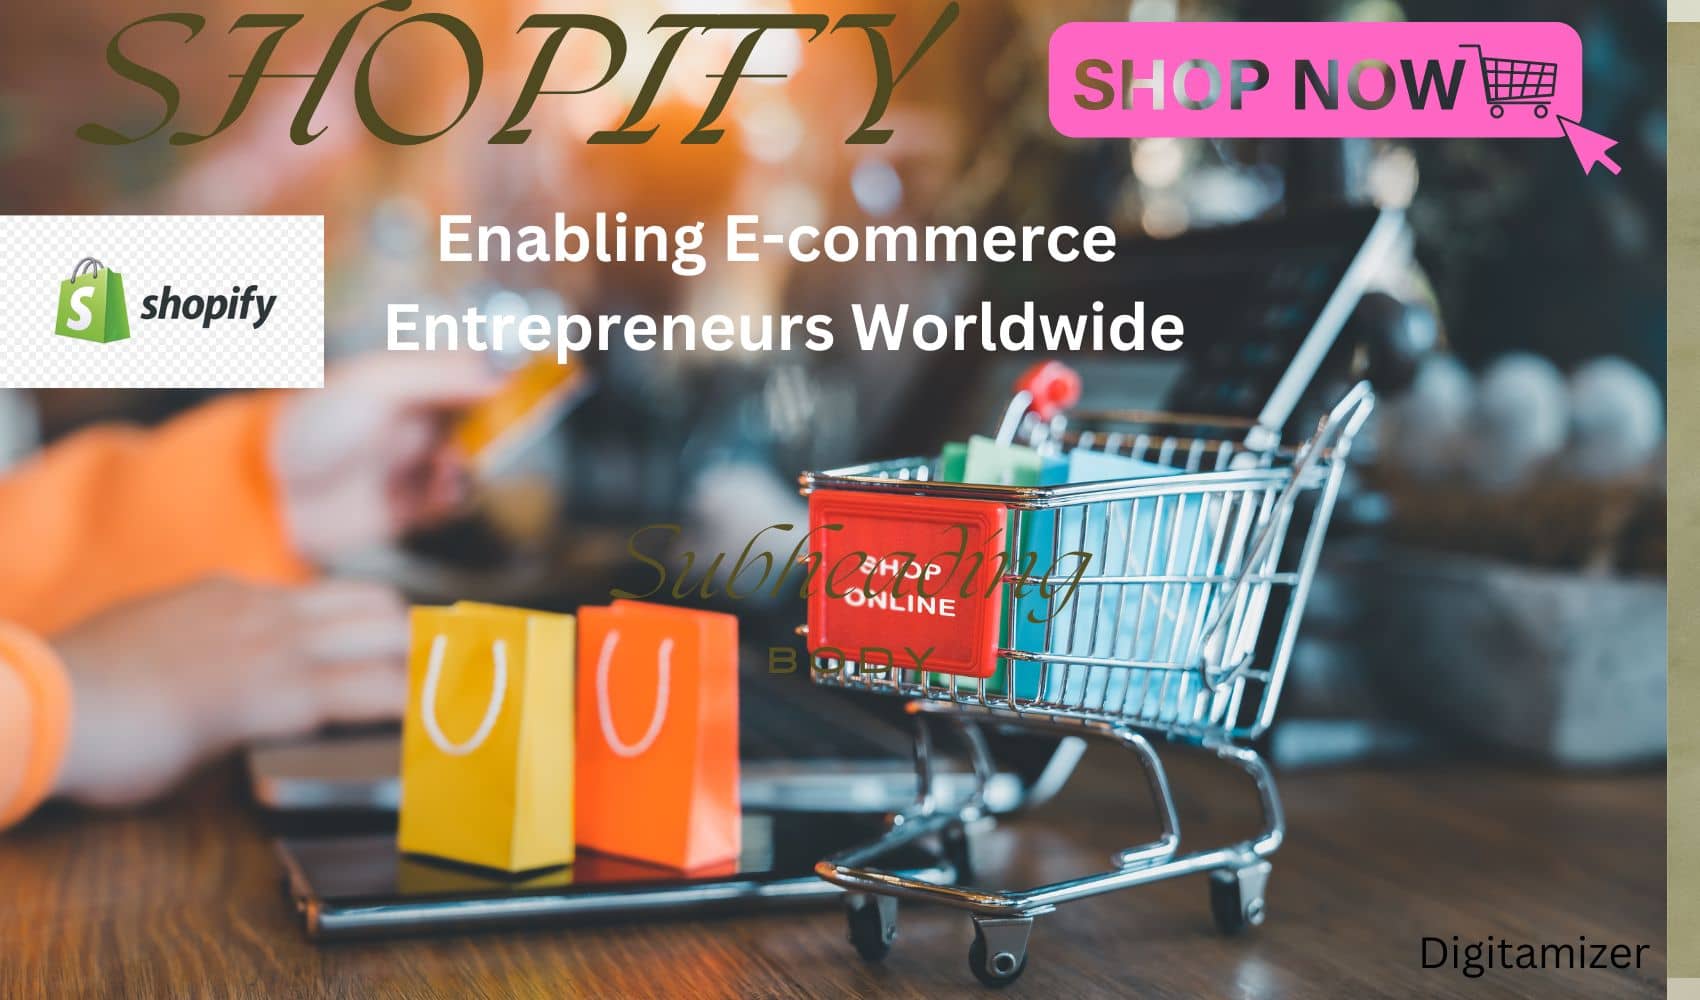 Shopify Featured Image